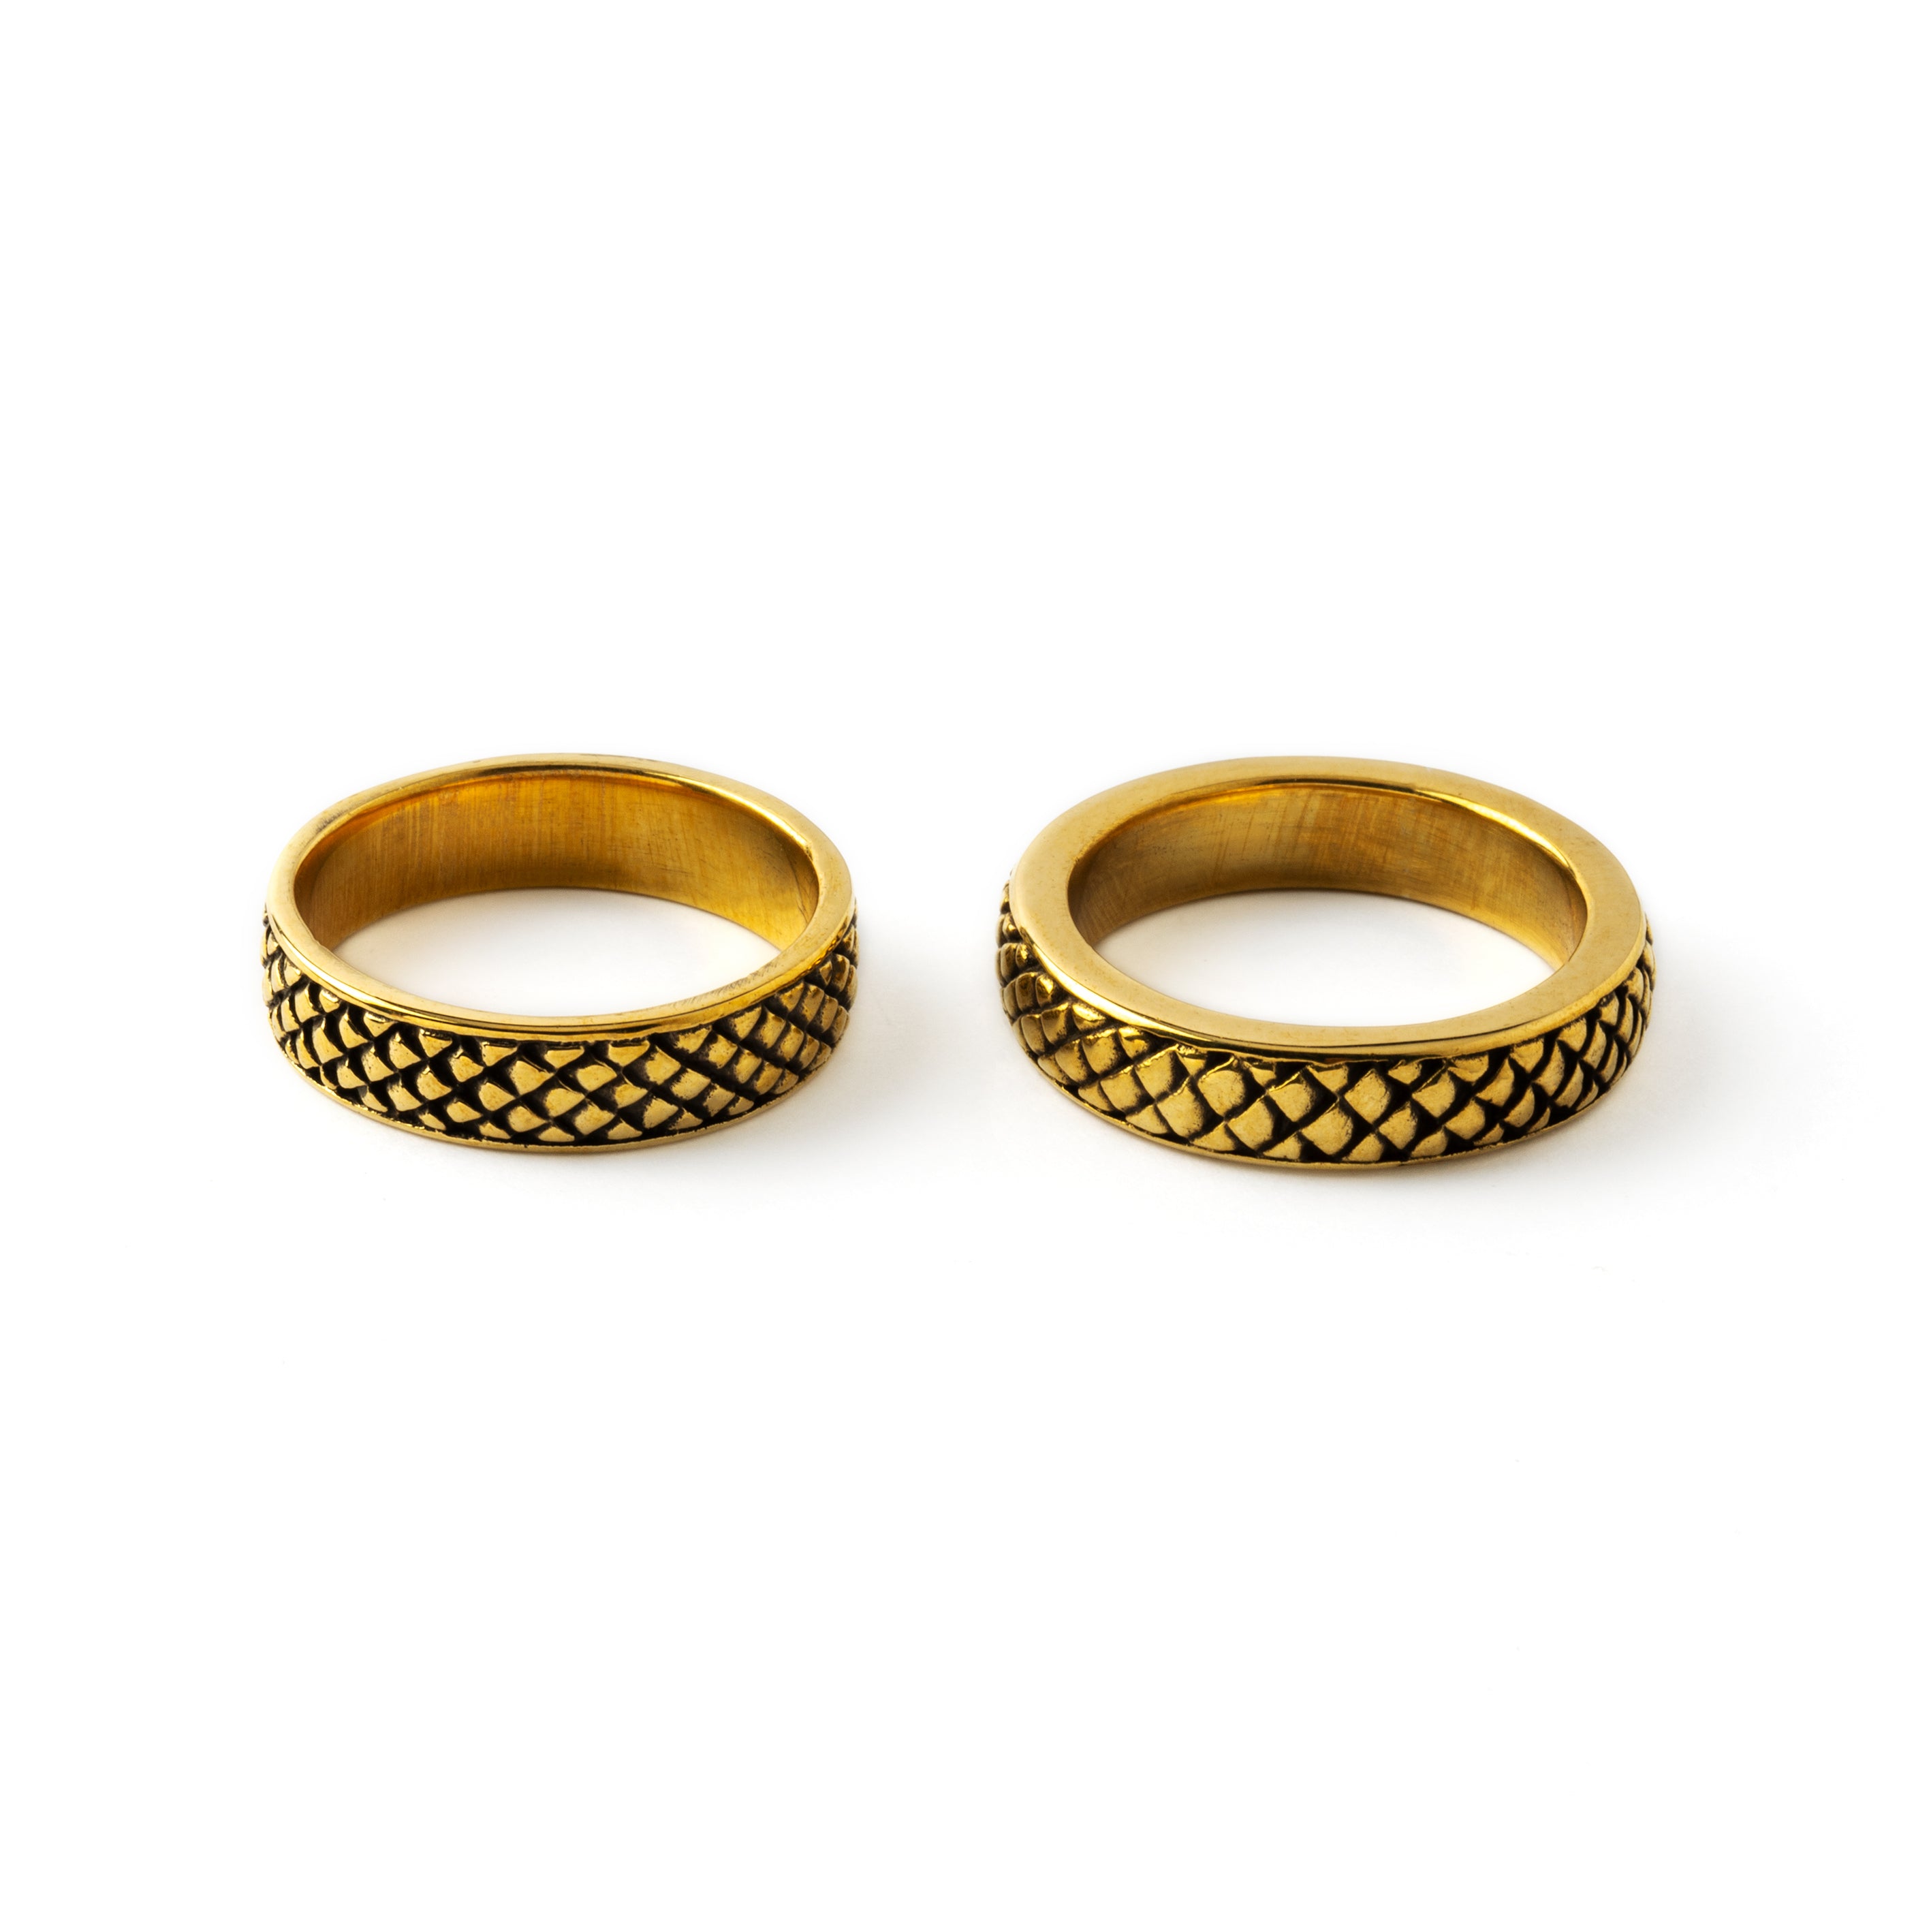 Rebirth- men and women designs golden brass band rings with snake scales frontal view